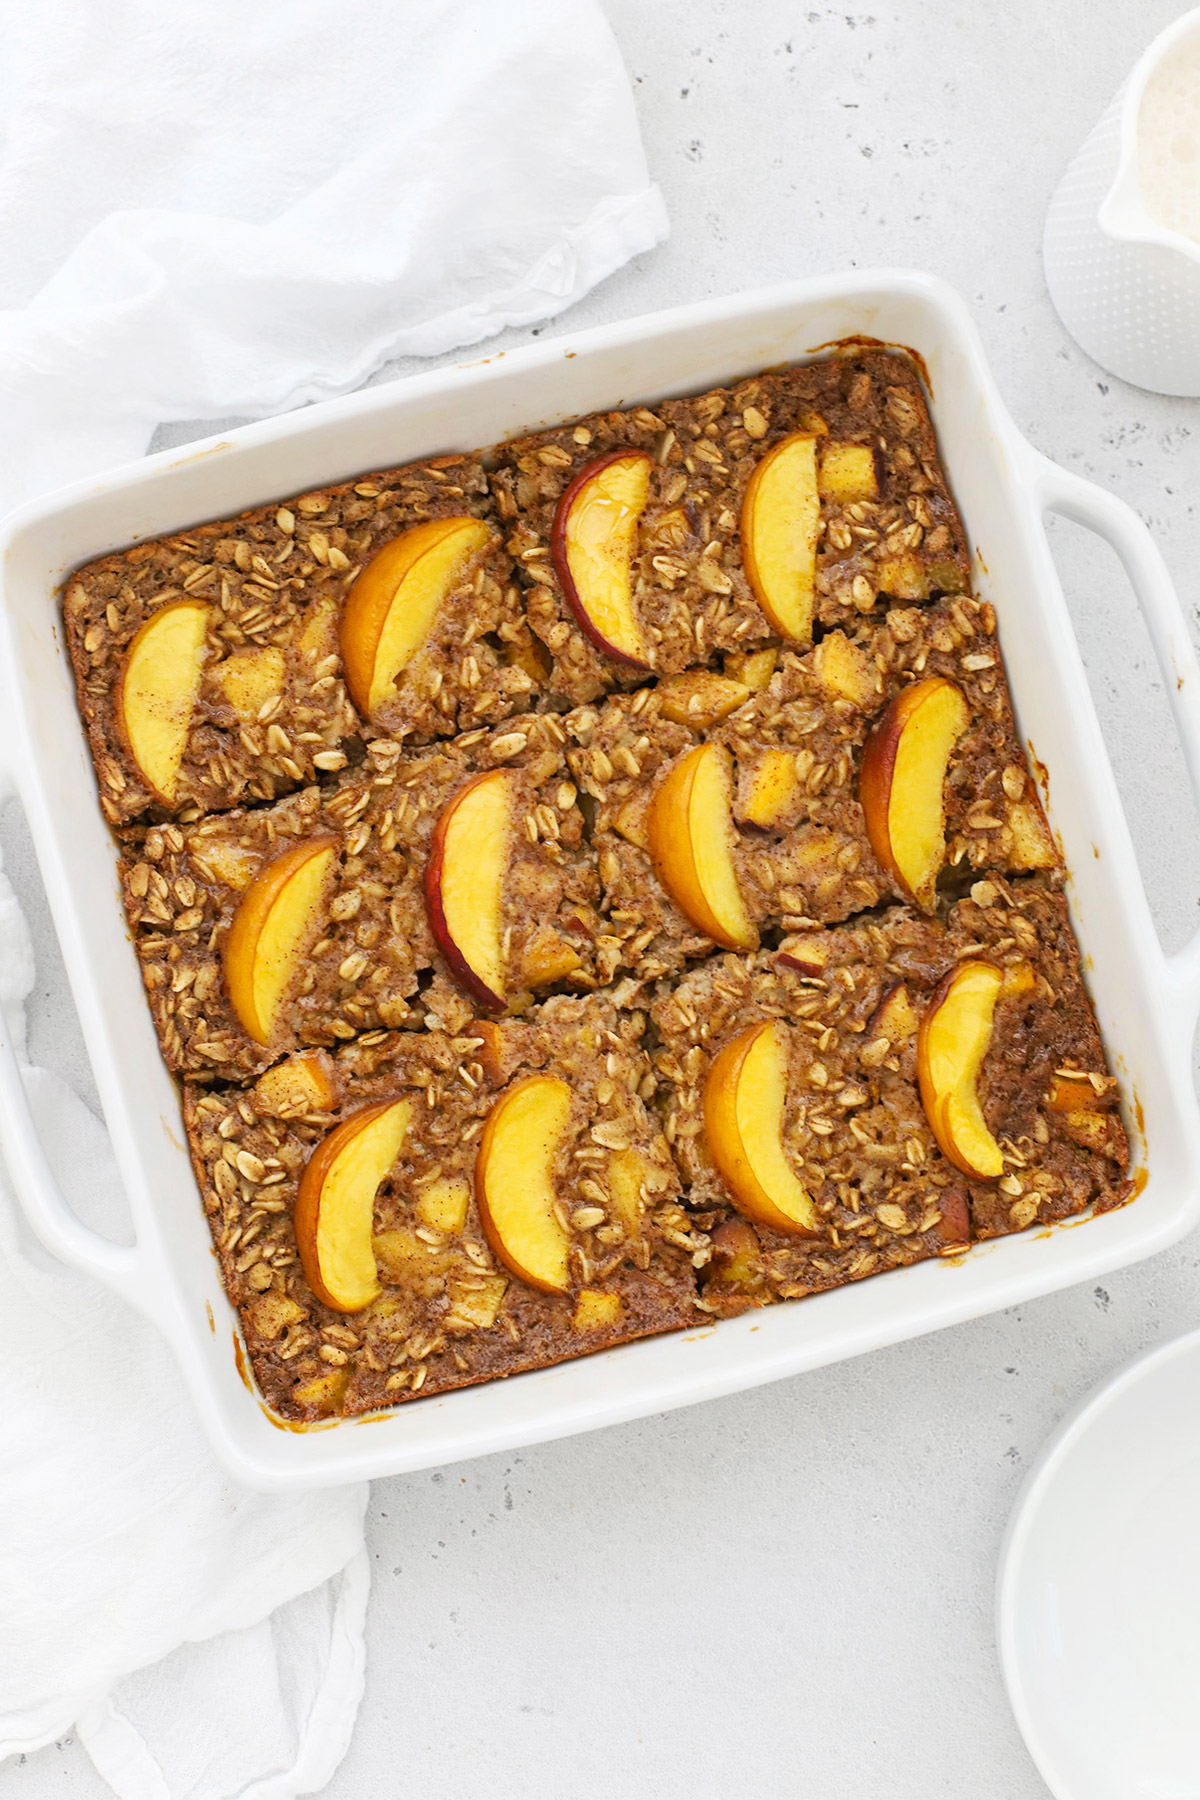 Overhead view of a pan of gluten-free peach baked oatmeal